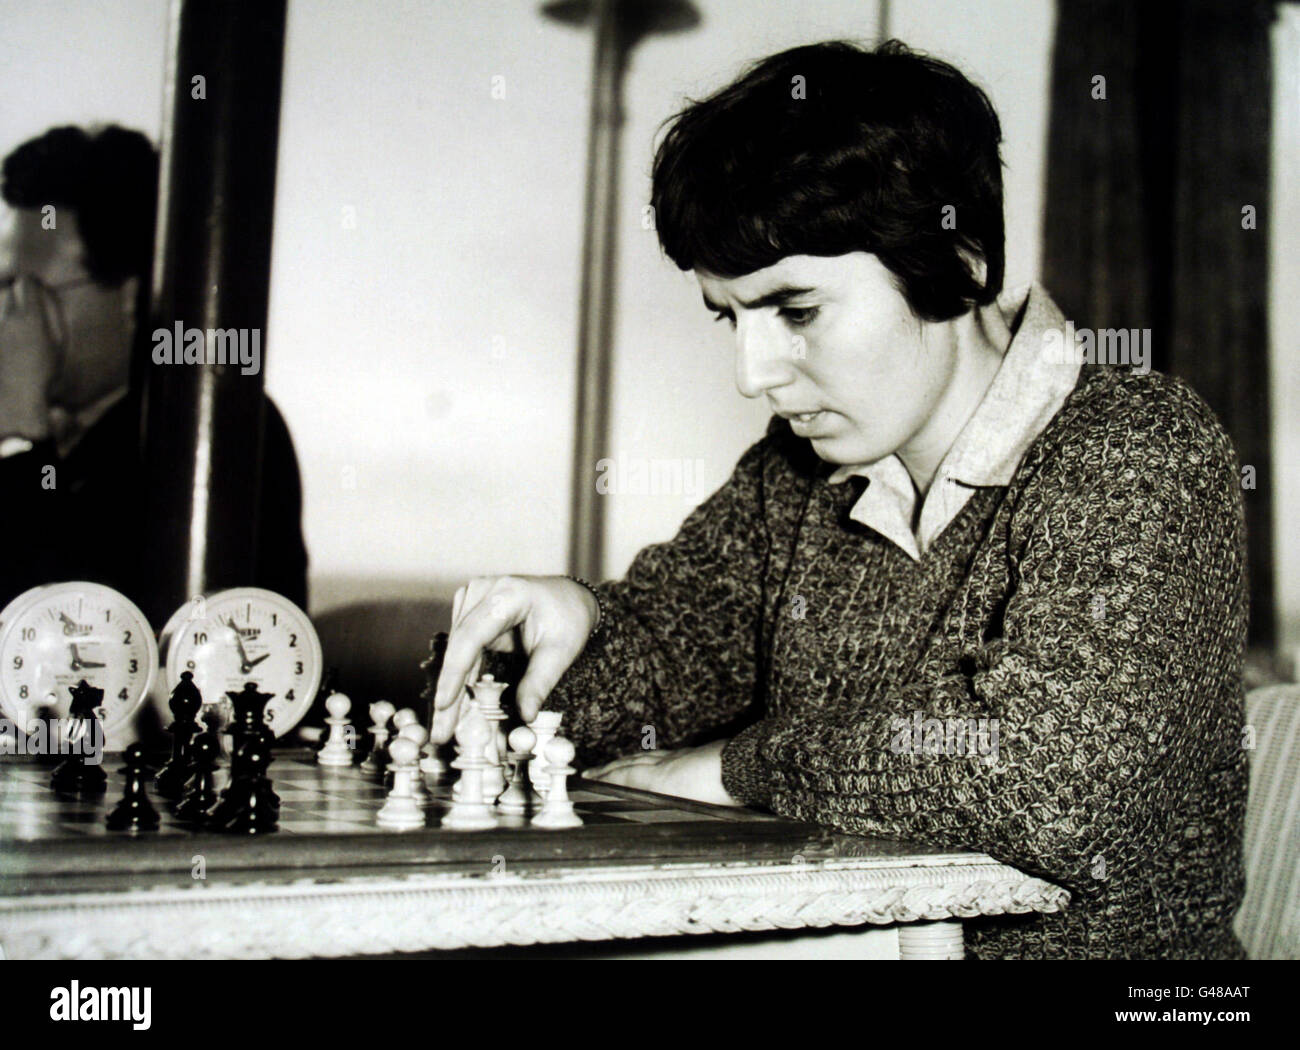 The Best Chess Games of Henrique Mecking 